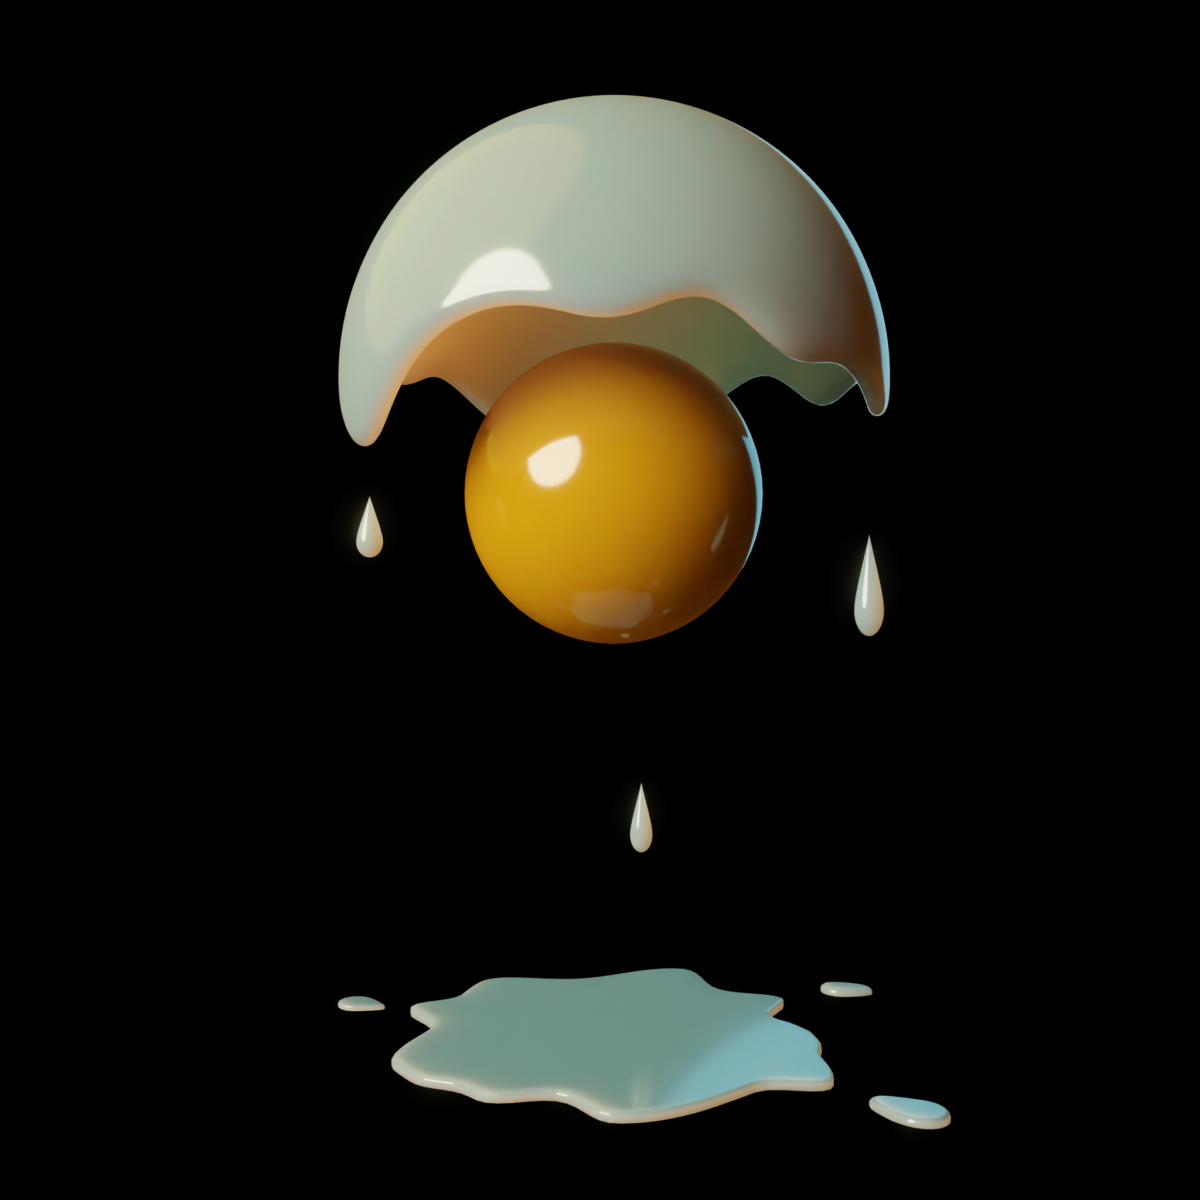 A surrealist egg on a black background. The egg yolk is a floating sphere with the egg white dripping down from an invisible sphere surrounding the yolk. Or something?